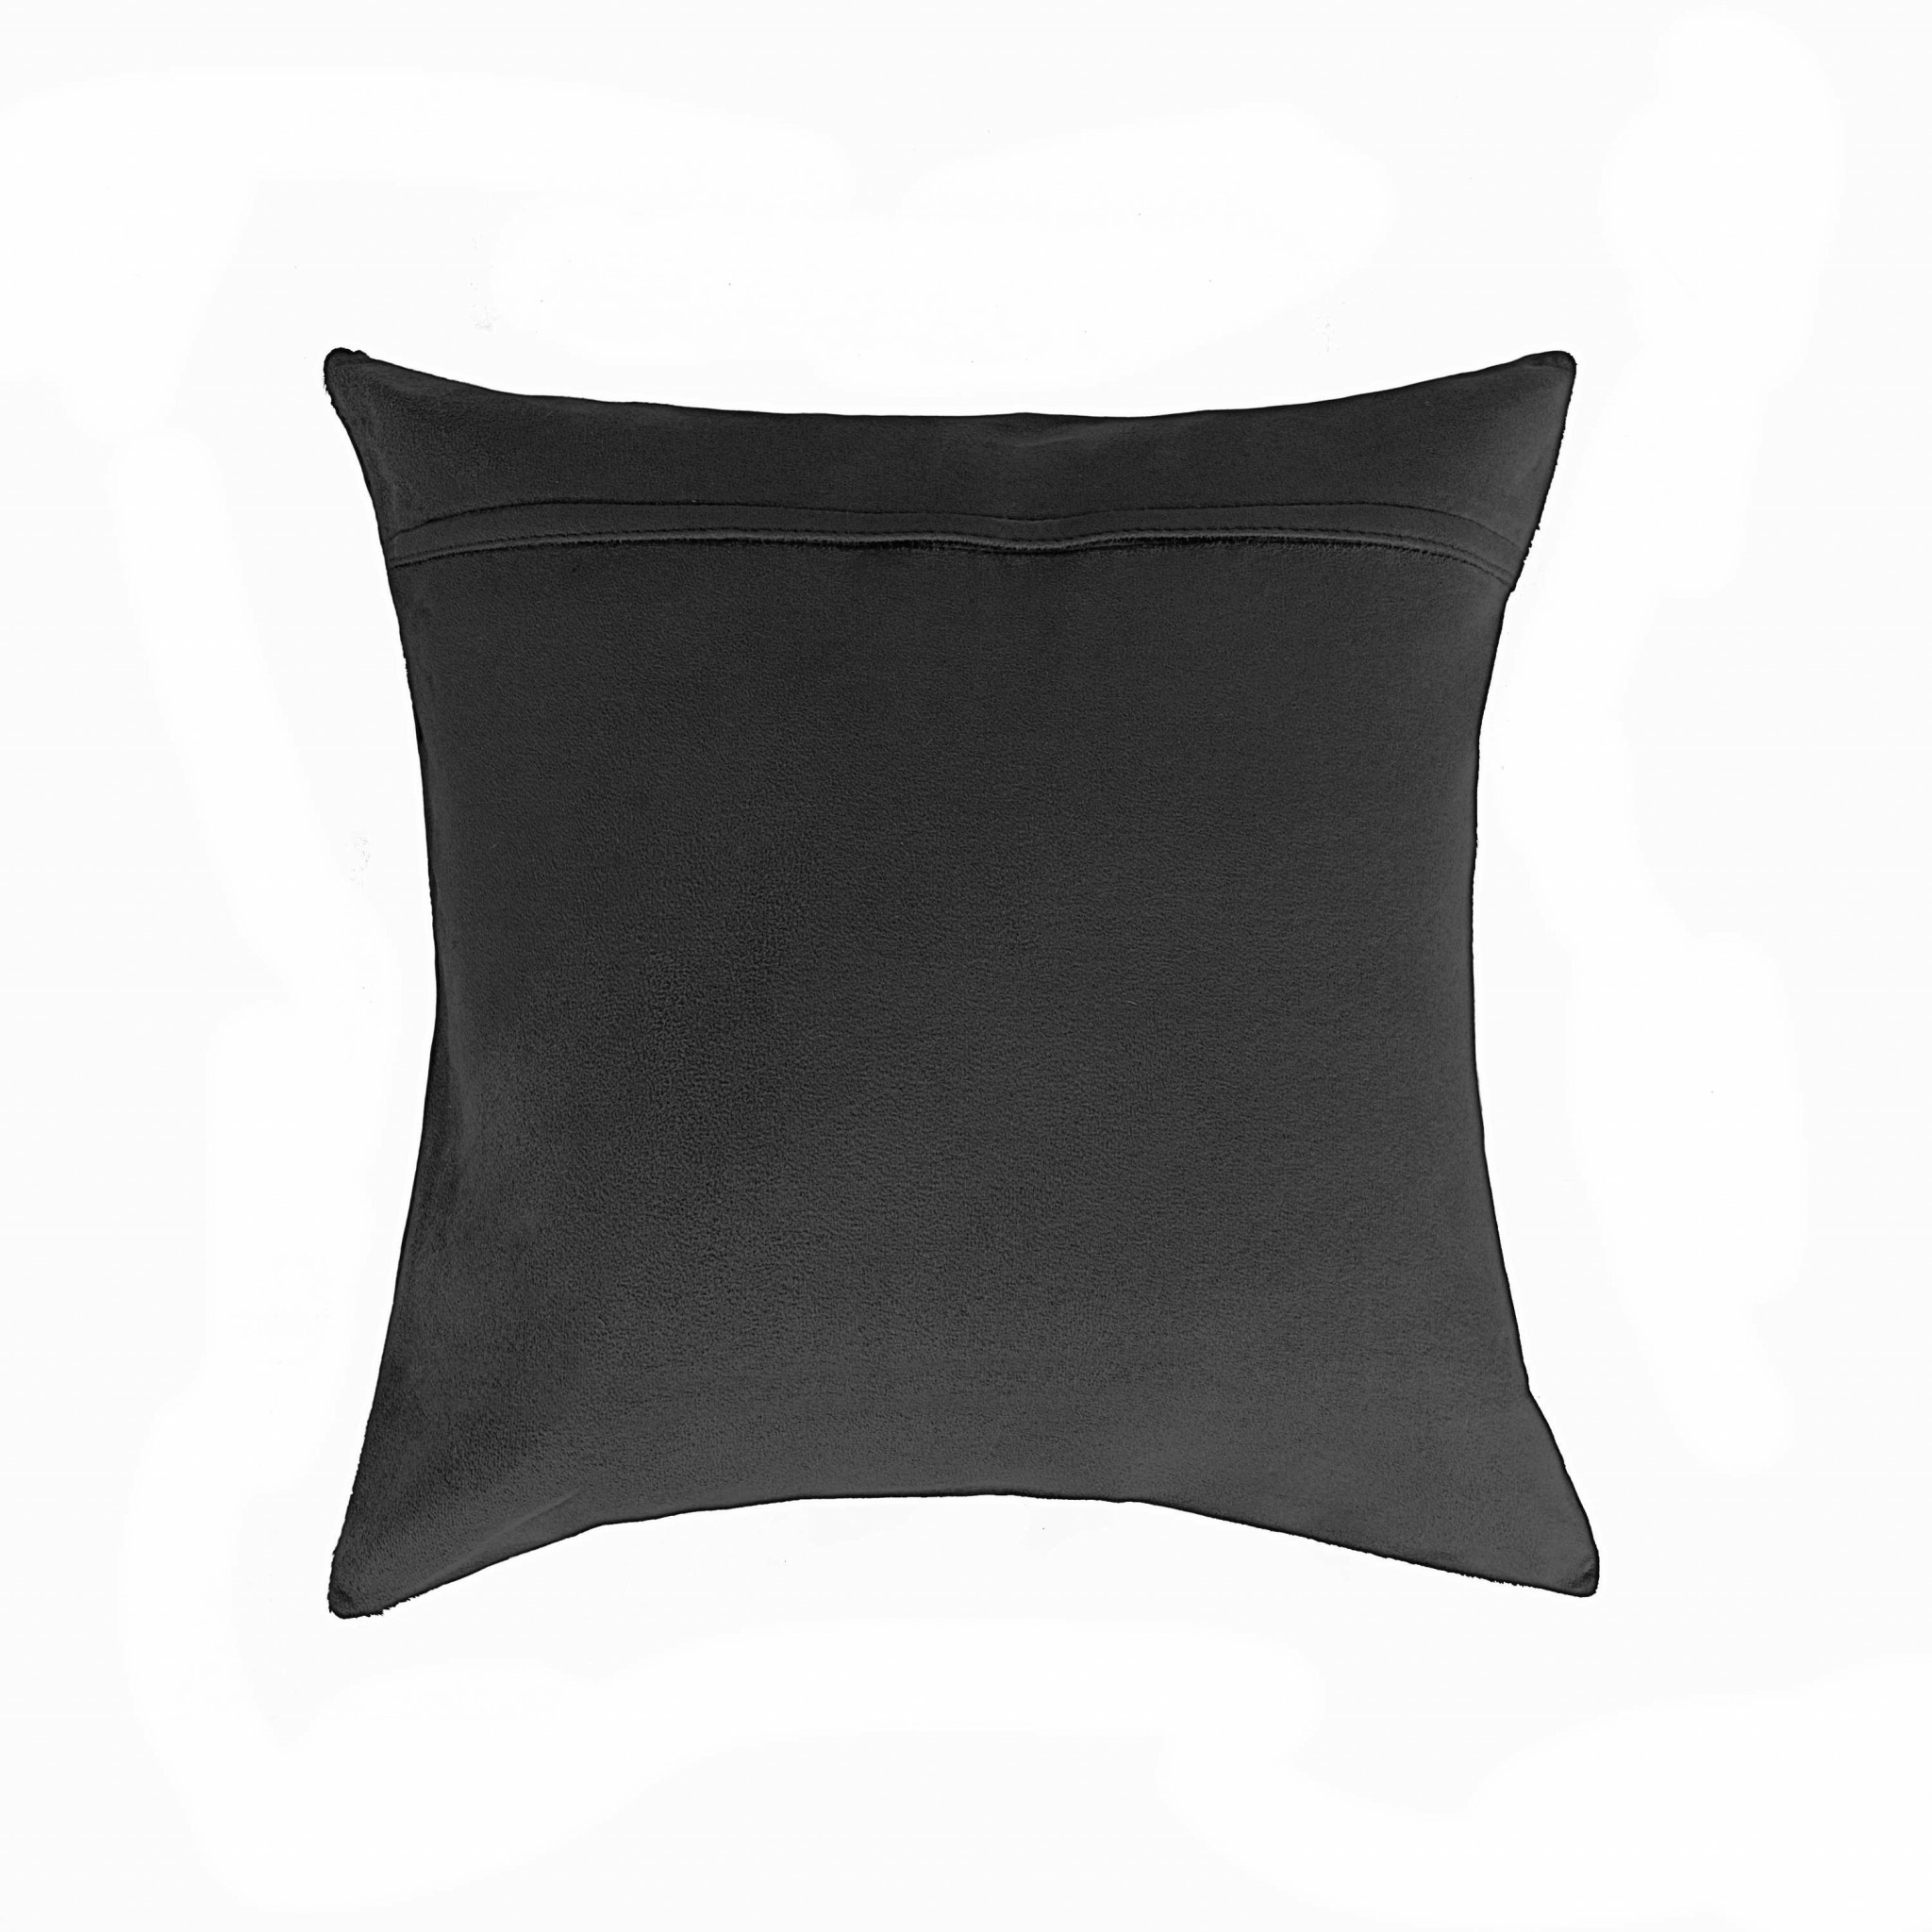 18" x 18" x 5" Black And White - Pillow 2-Pack